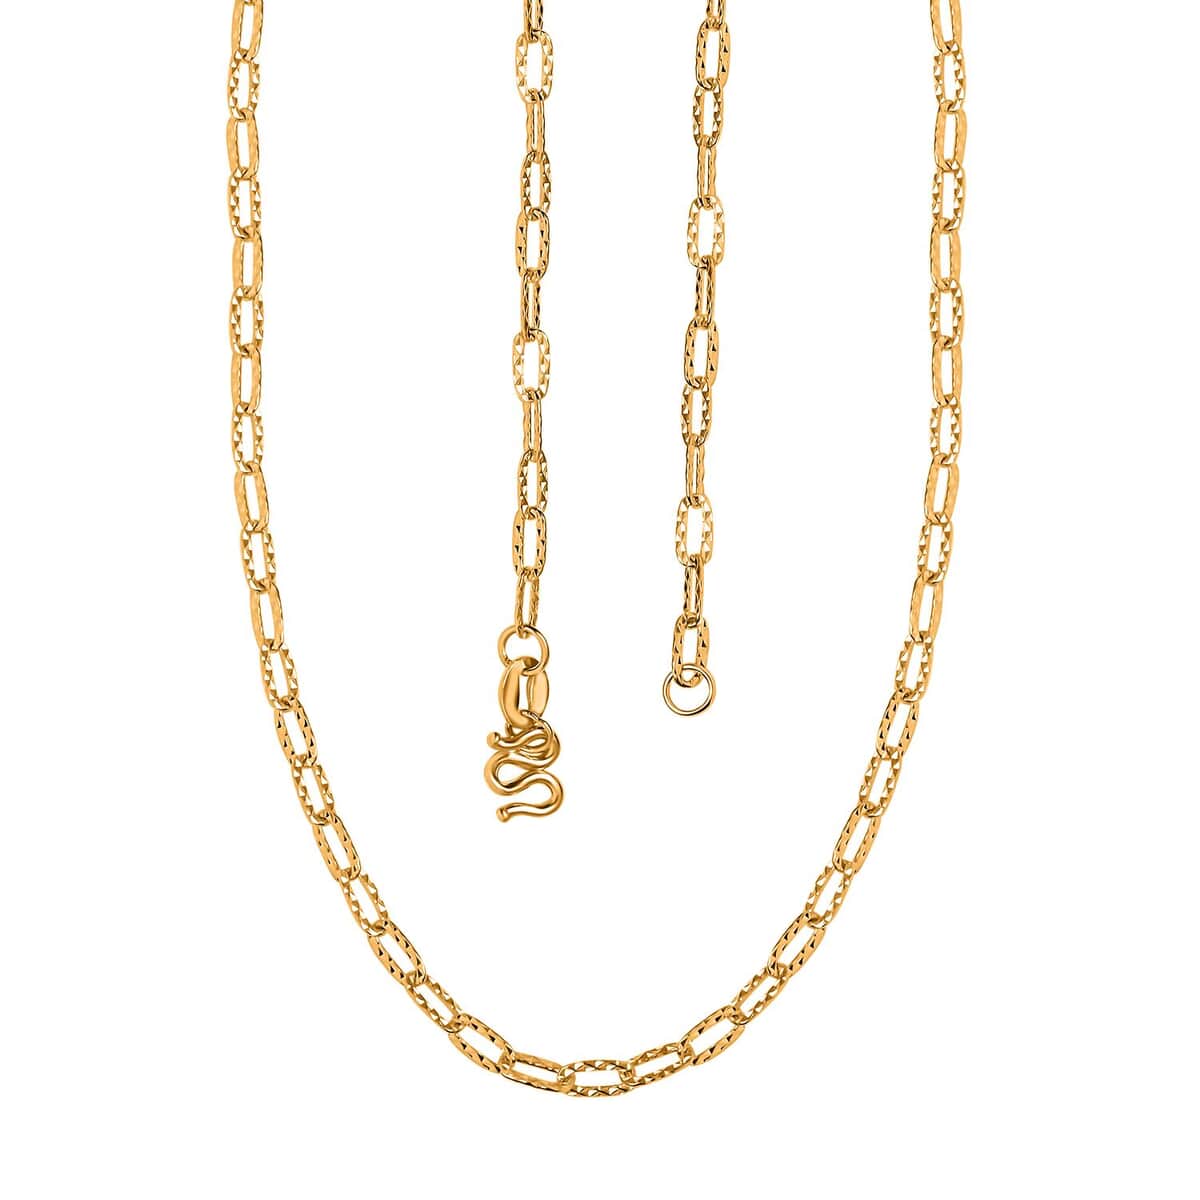 24K Yellow Gold Link Chain Necklace 18 Inches 5.75 Grams image number 4